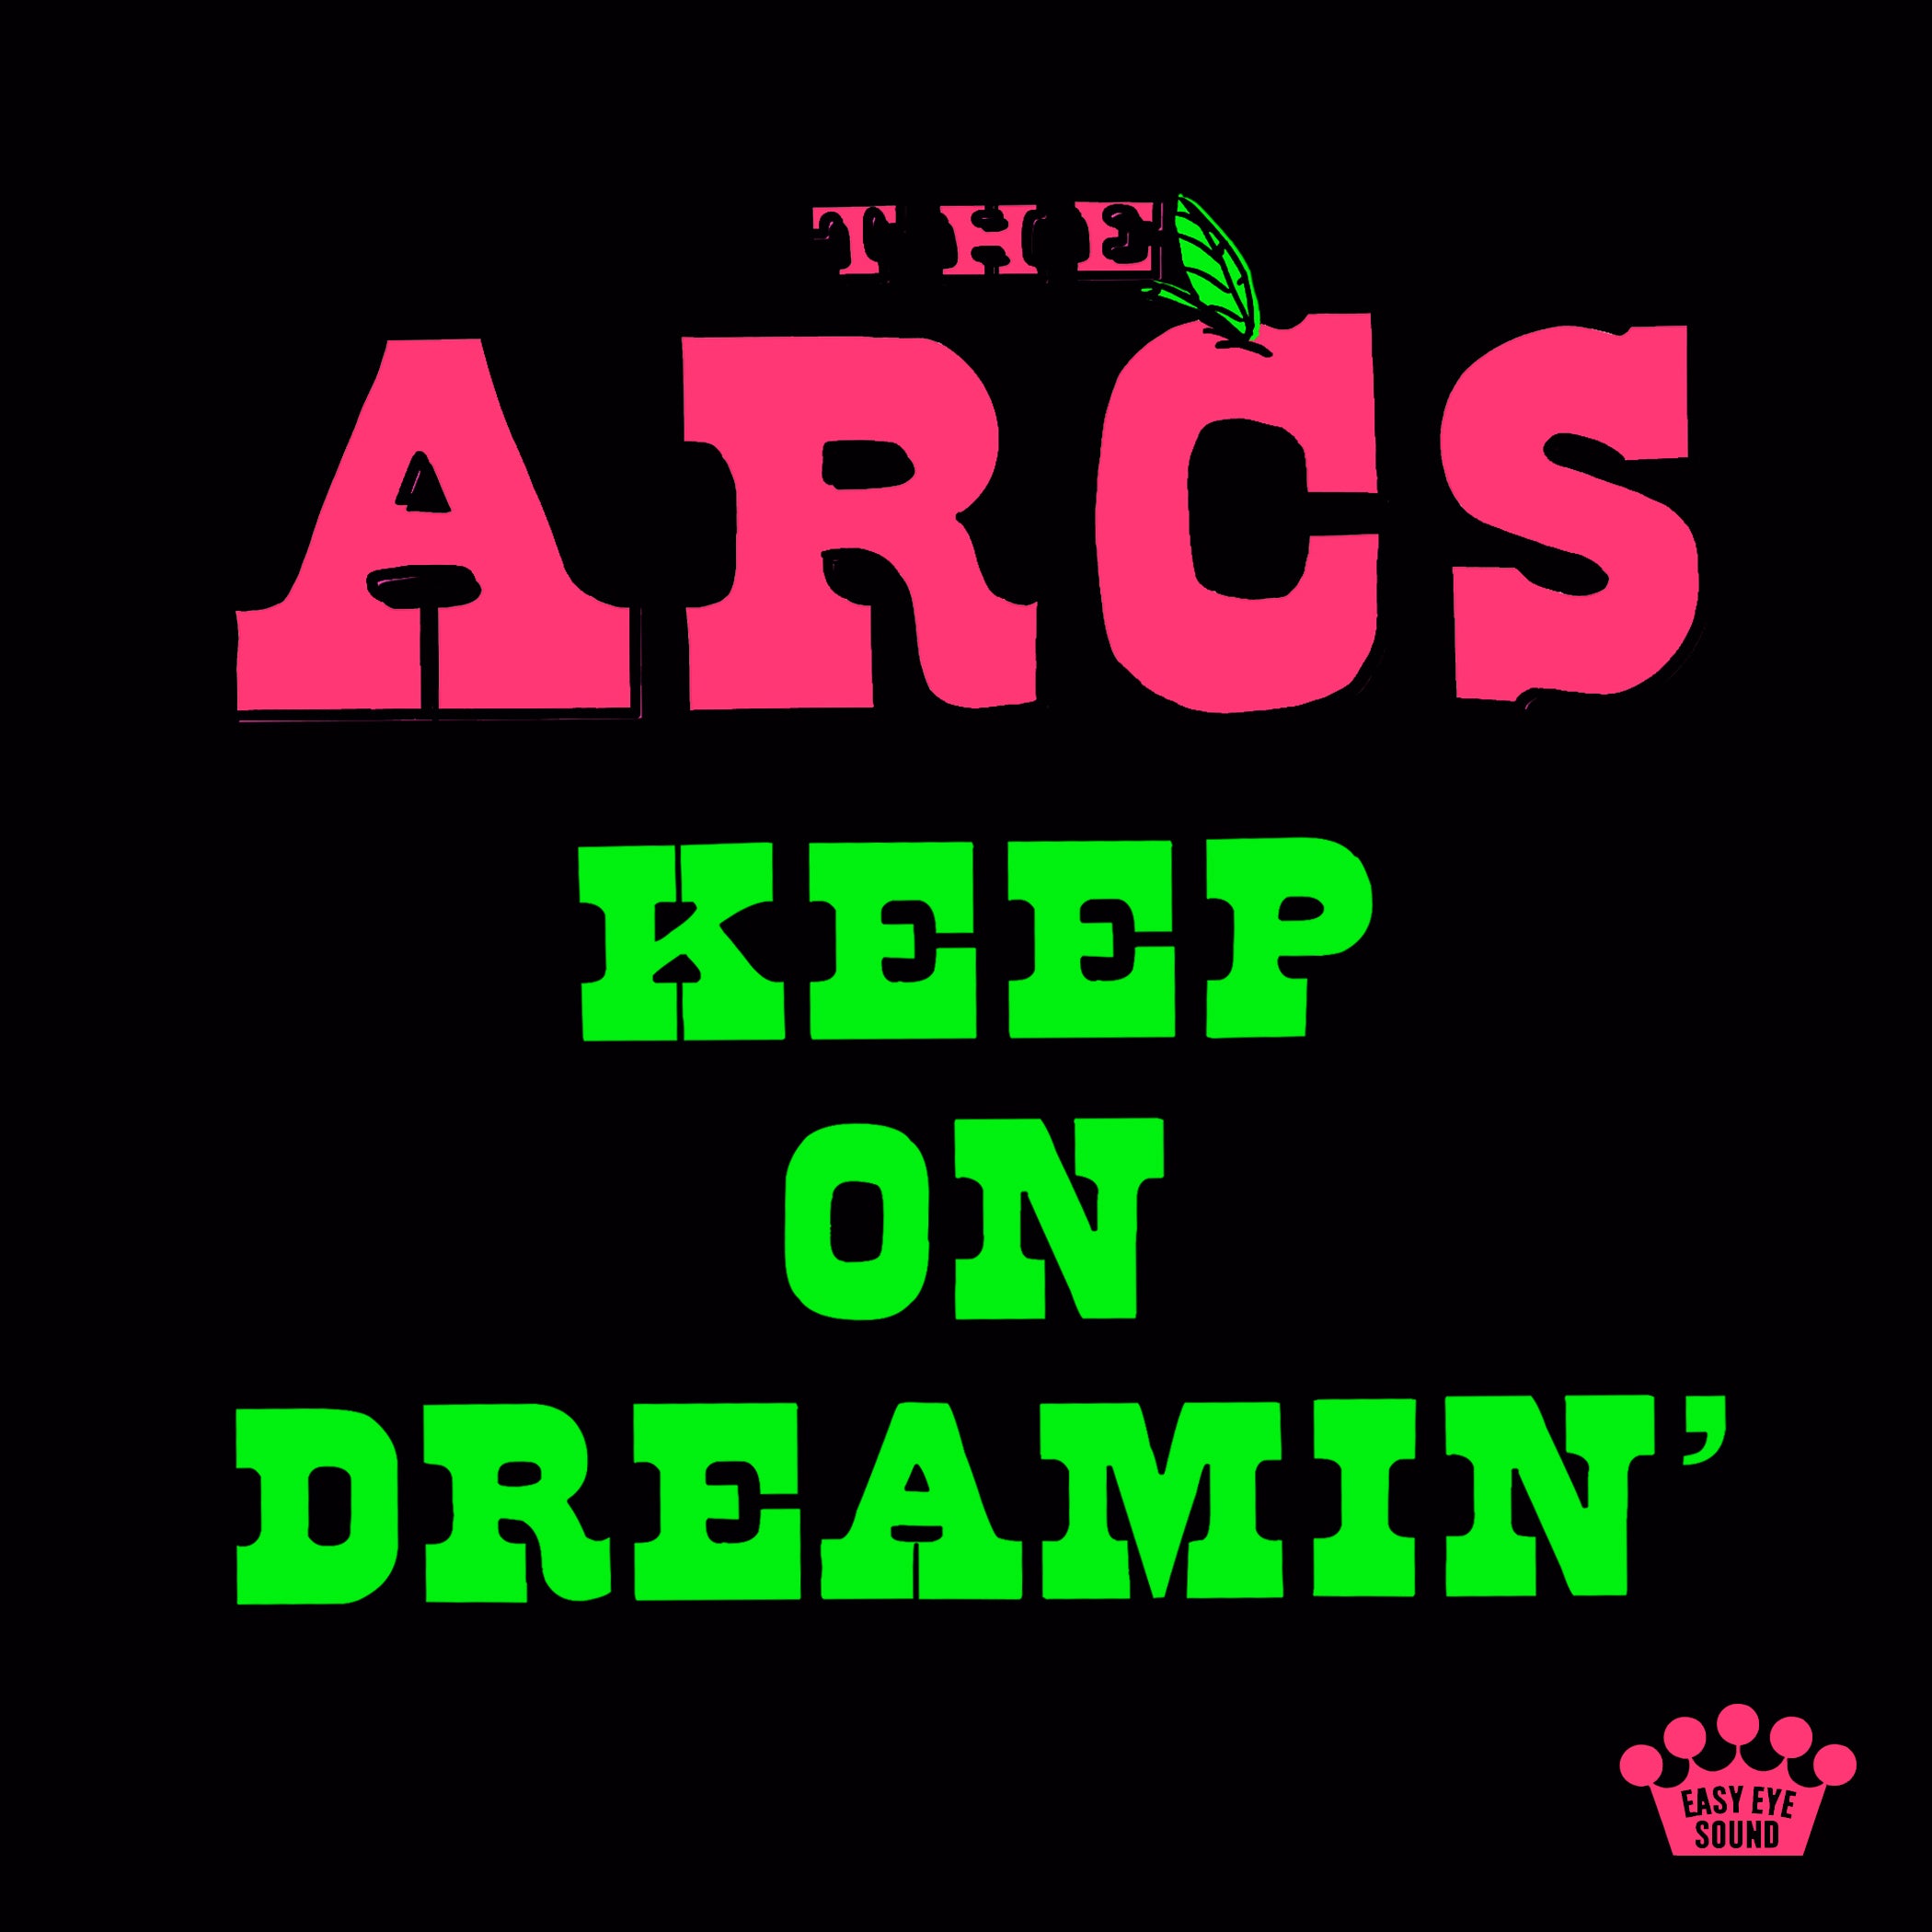 THE ARCS RELEASE “KEEP ON DREAMIN” AND ANNOUNCE AN UPCOMING ALBUM, THEIR FIRST MUSIC IN 7 YEARS